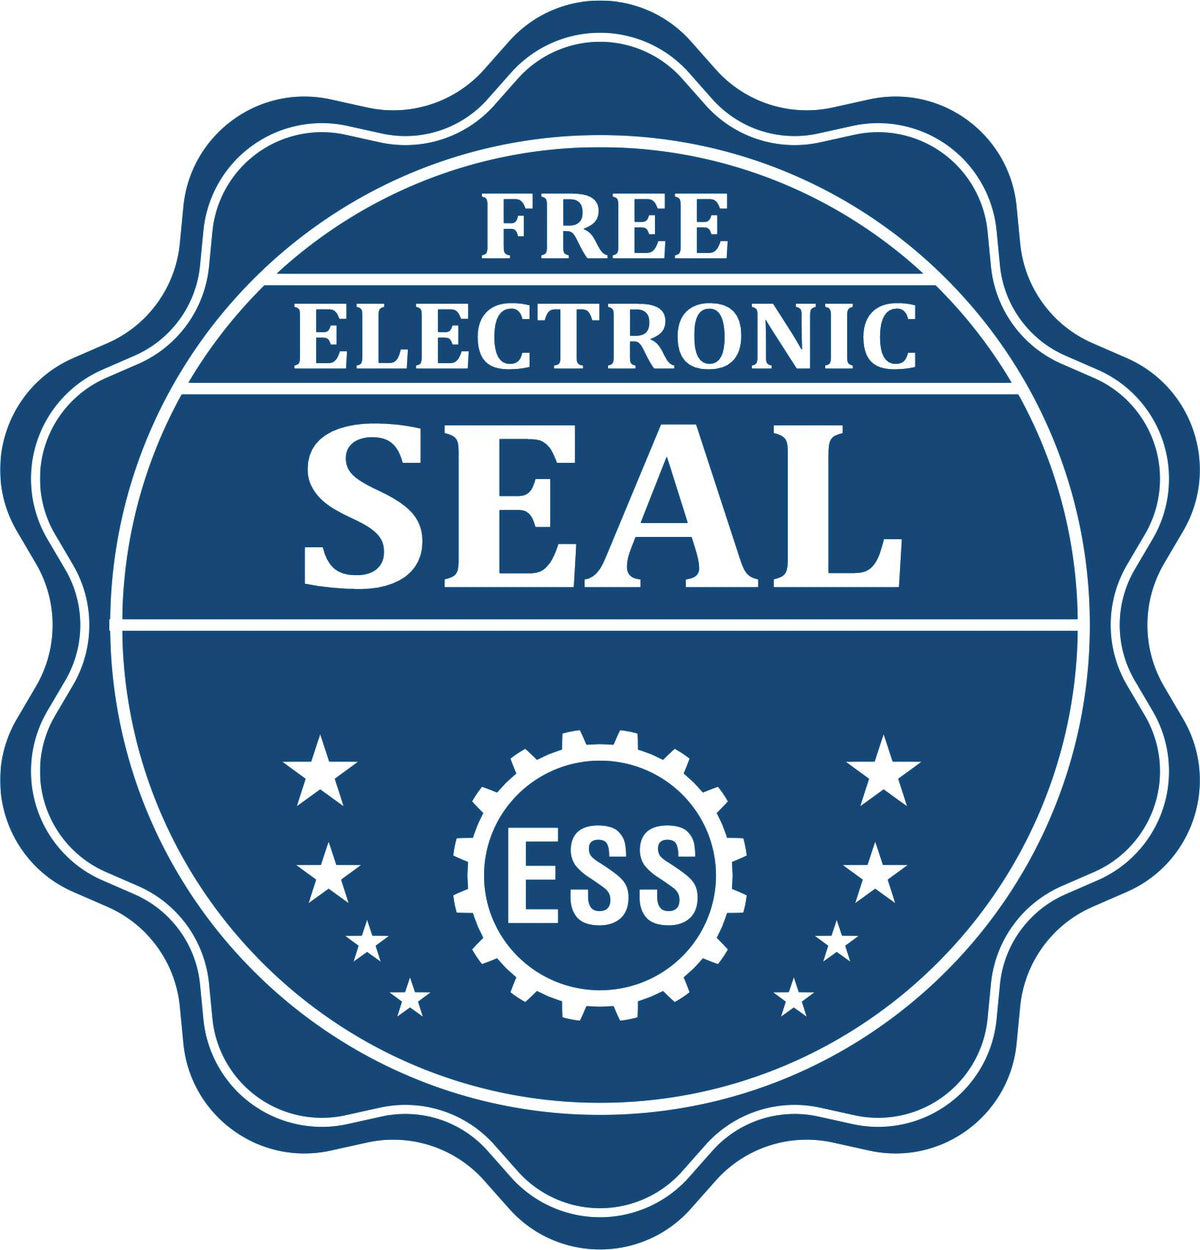 A badge showing a free electronic seal for the Wooden Handle Alabama State Seal Notary Public Stamp with stars and the ESS gear on the emblem.